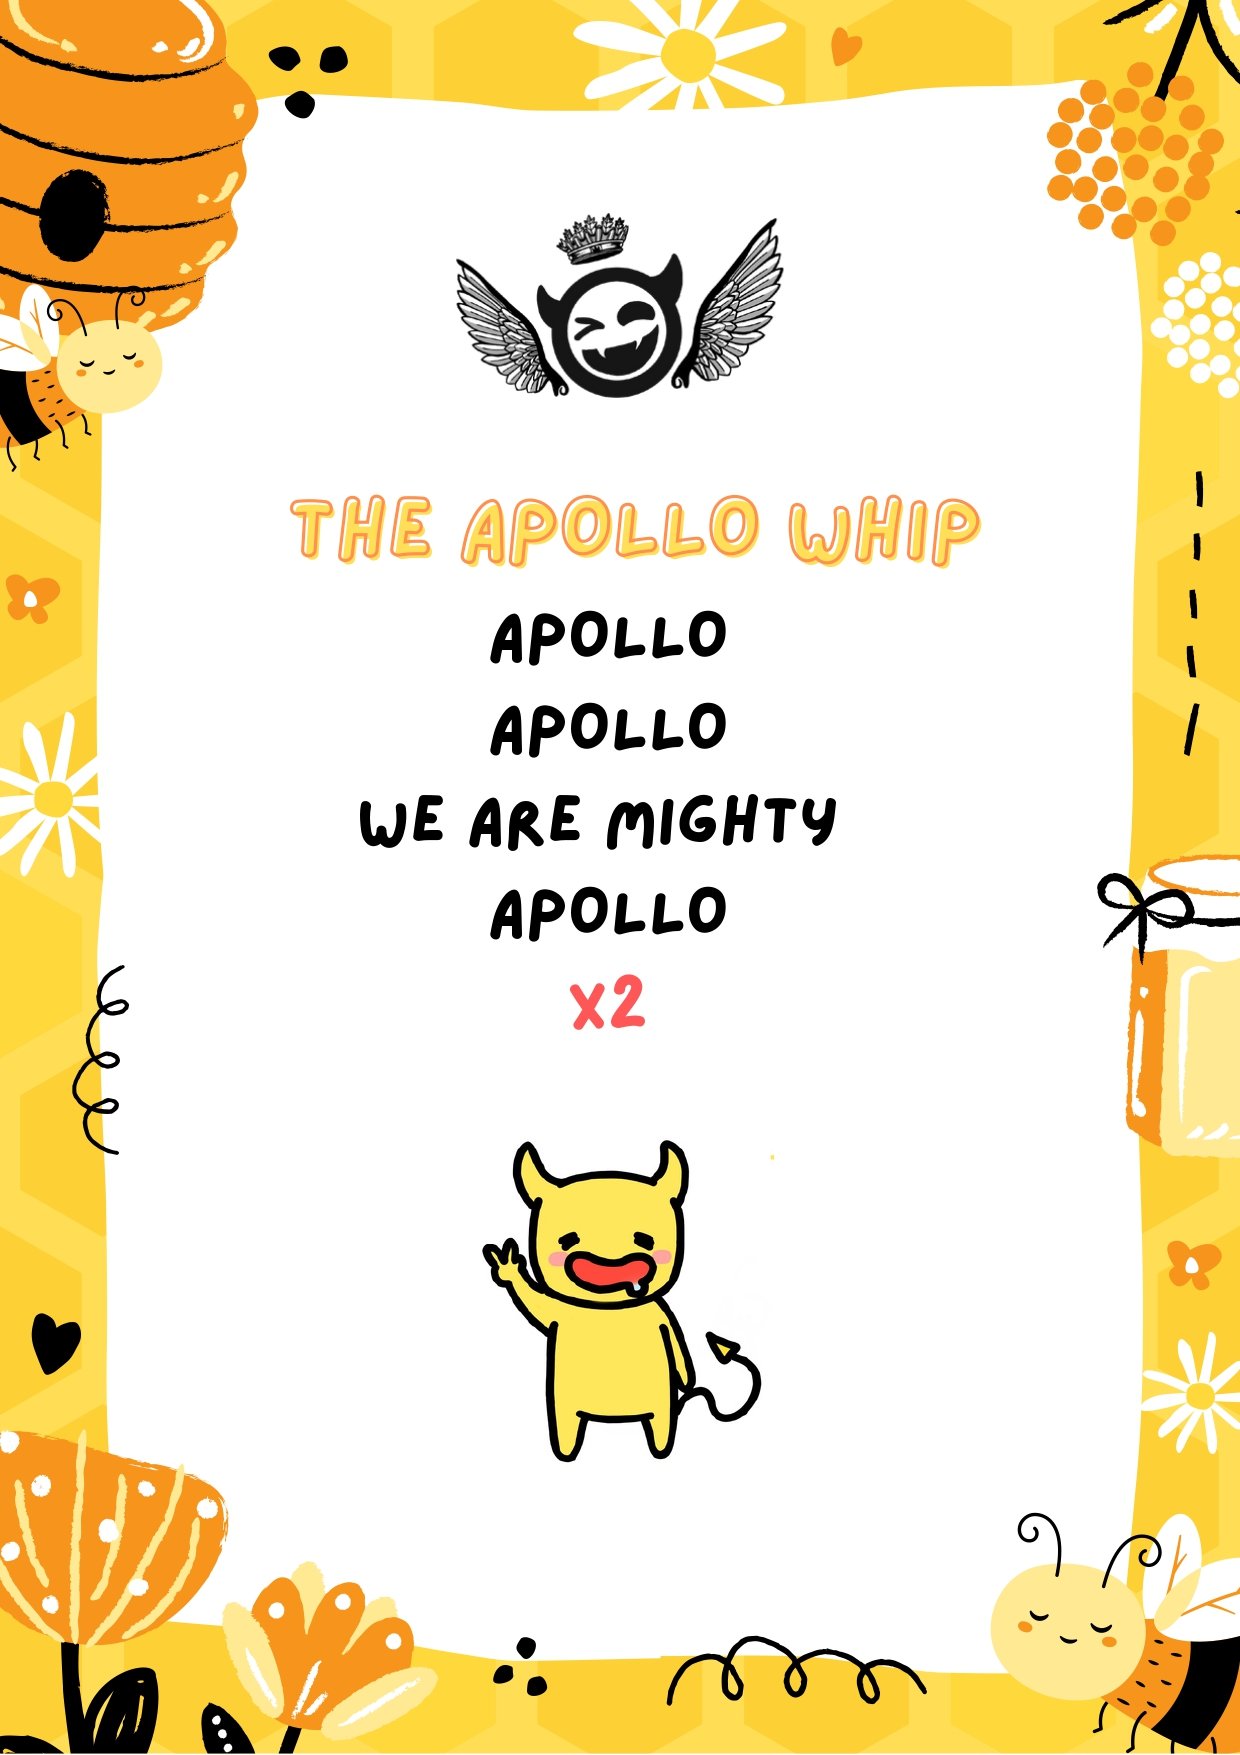 apollo cheer_pages-to-jpg-0006.jpg